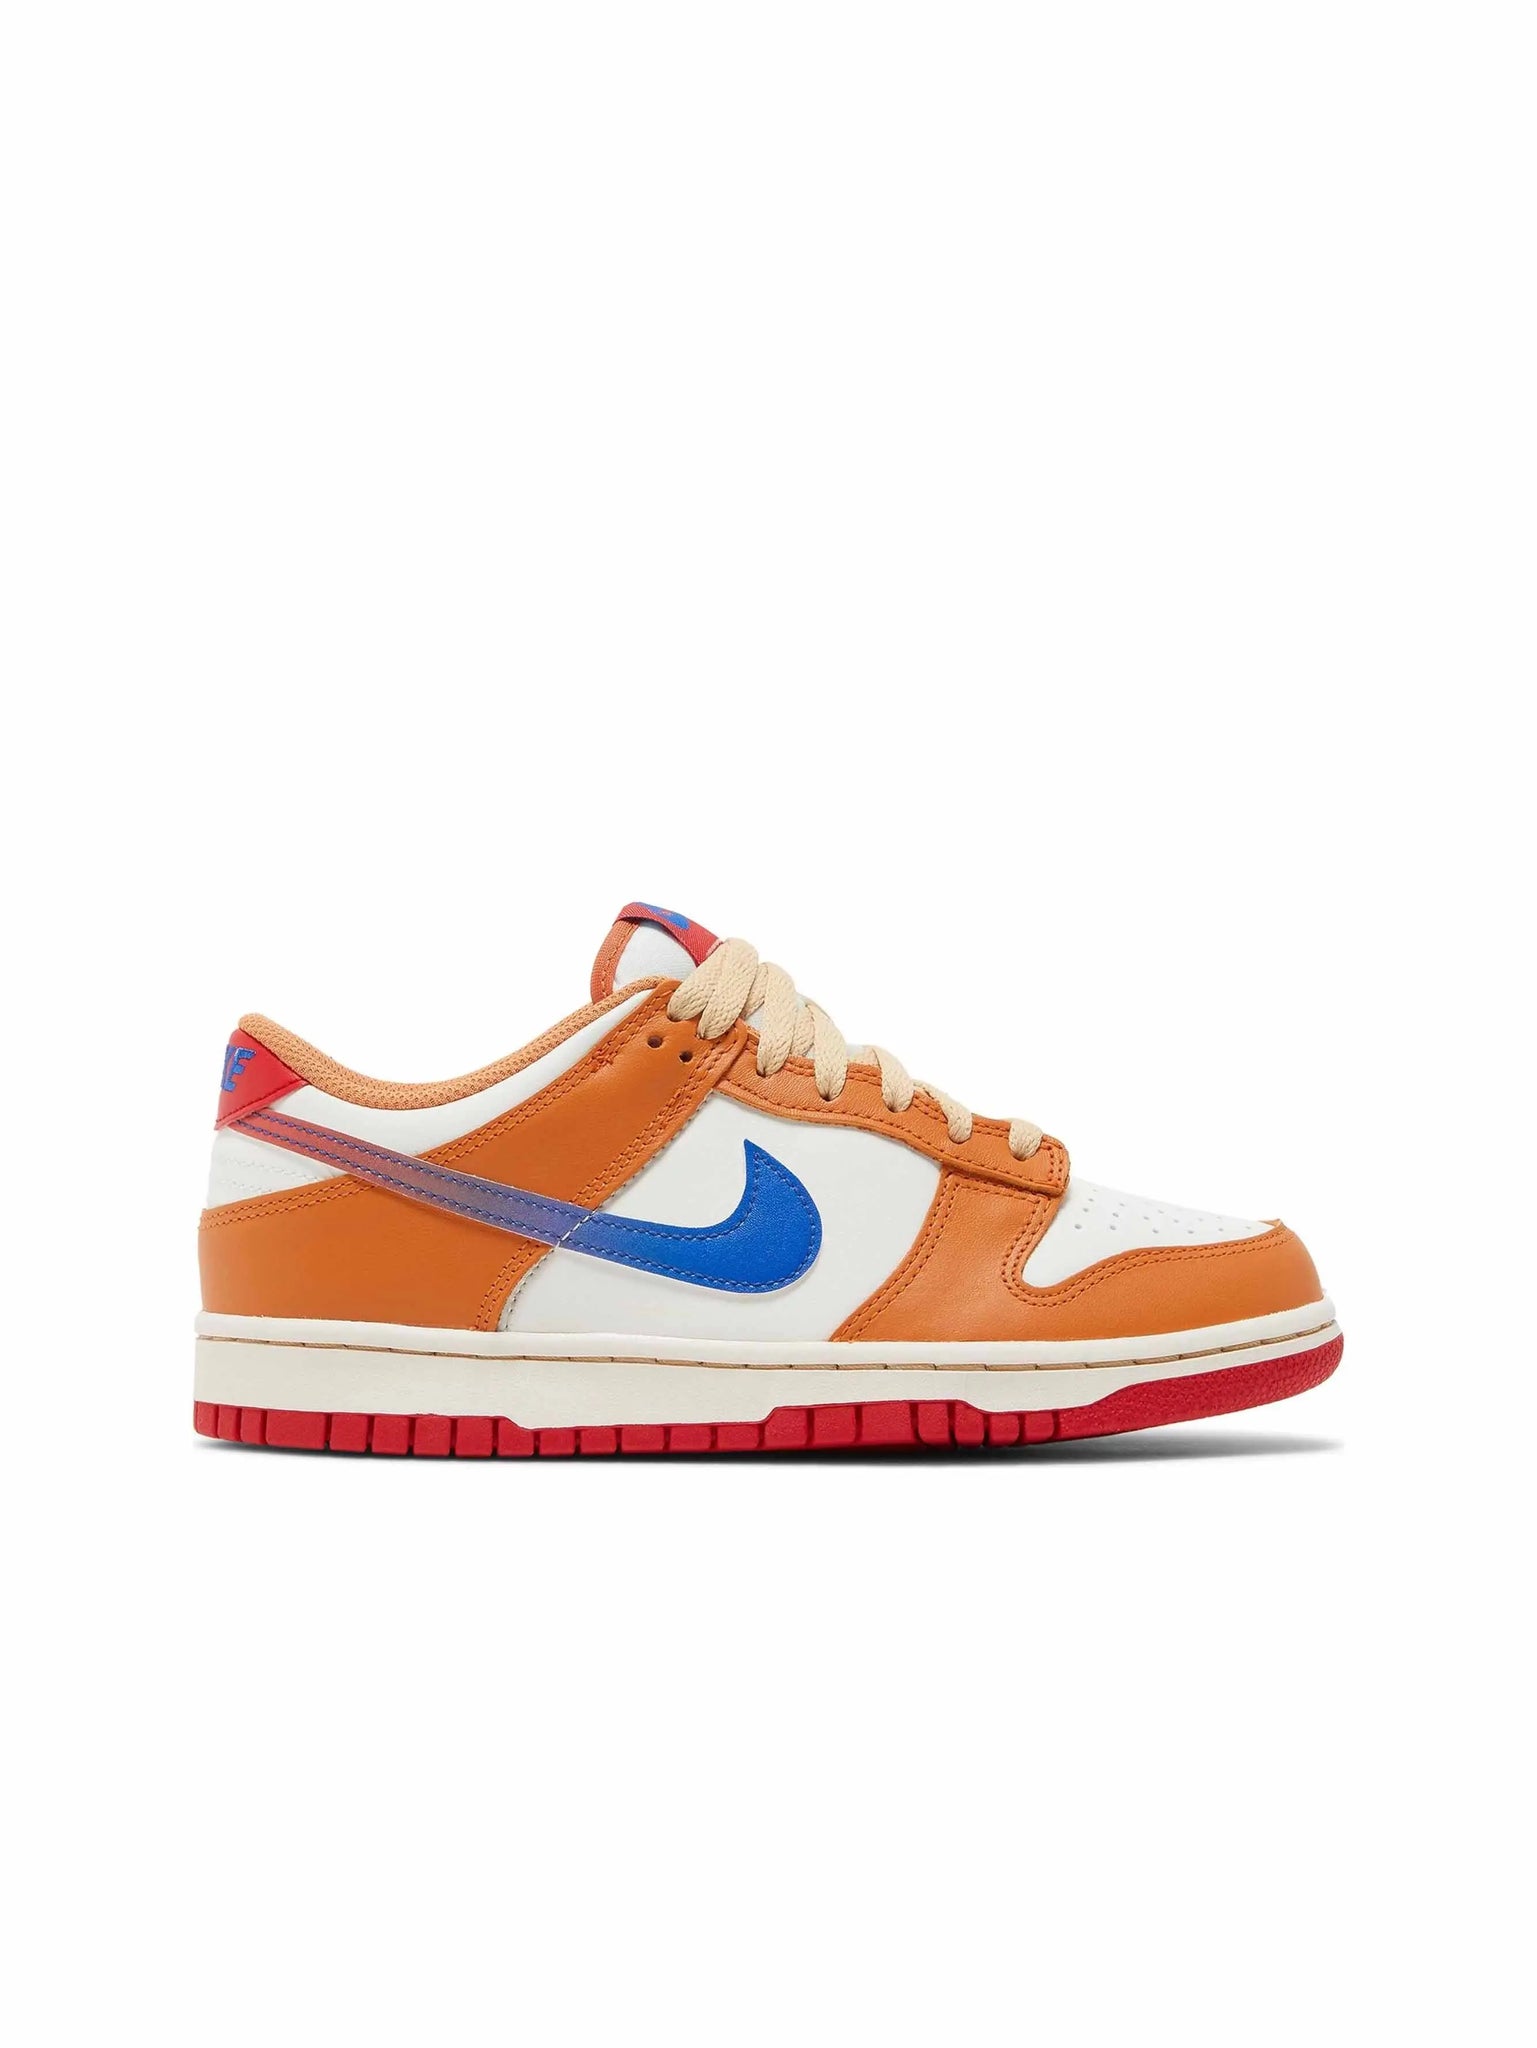 Nike Dunk Low Hot Curry Game Royal (GS) in Melbourne, Australia - Prior